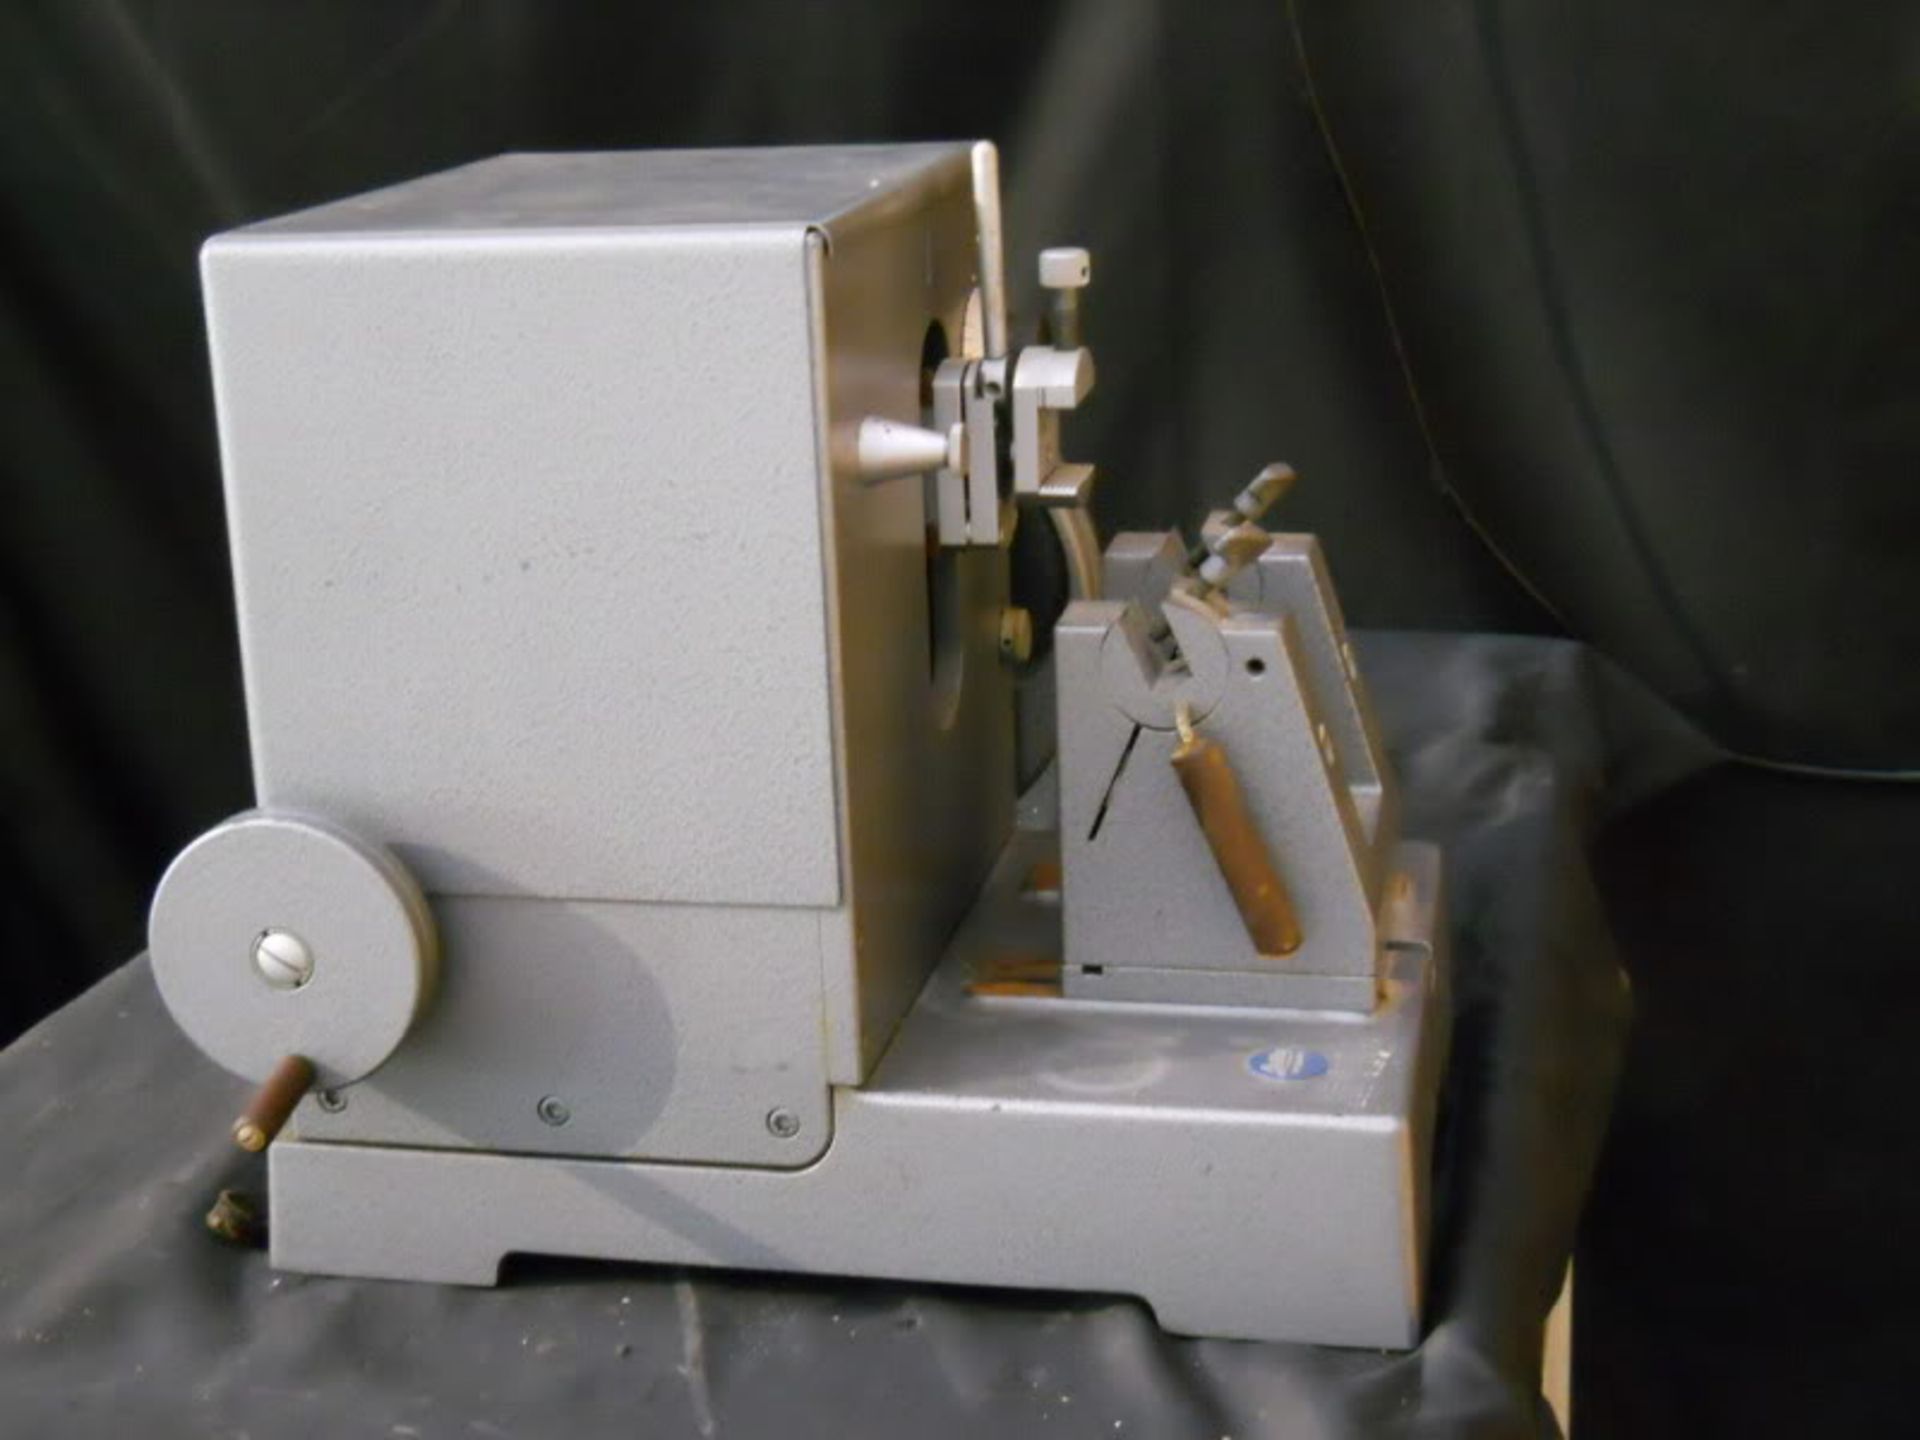 Leitz Wetzler Rotary Microtome Model 1212, Qty 1, 320935862239 - Image 2 of 4